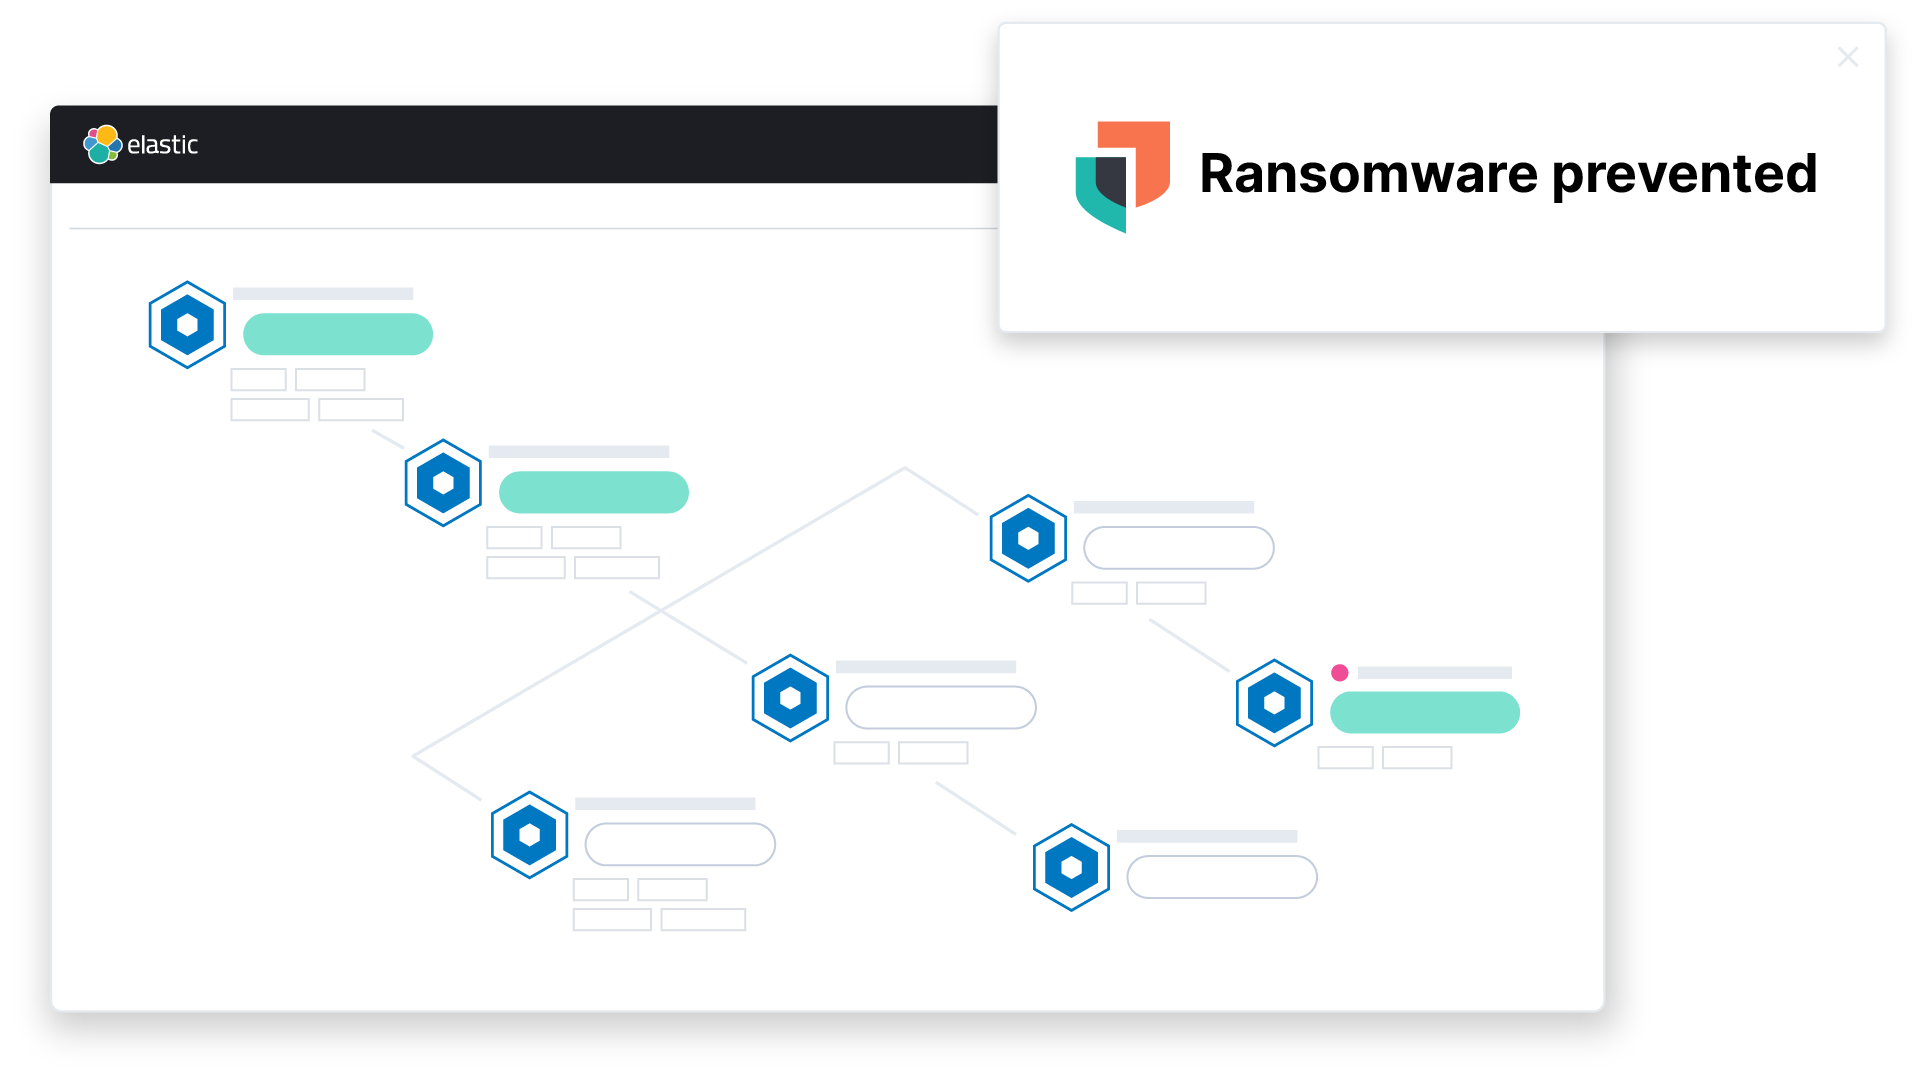 Process tree analysis and ransomware prevention system notification